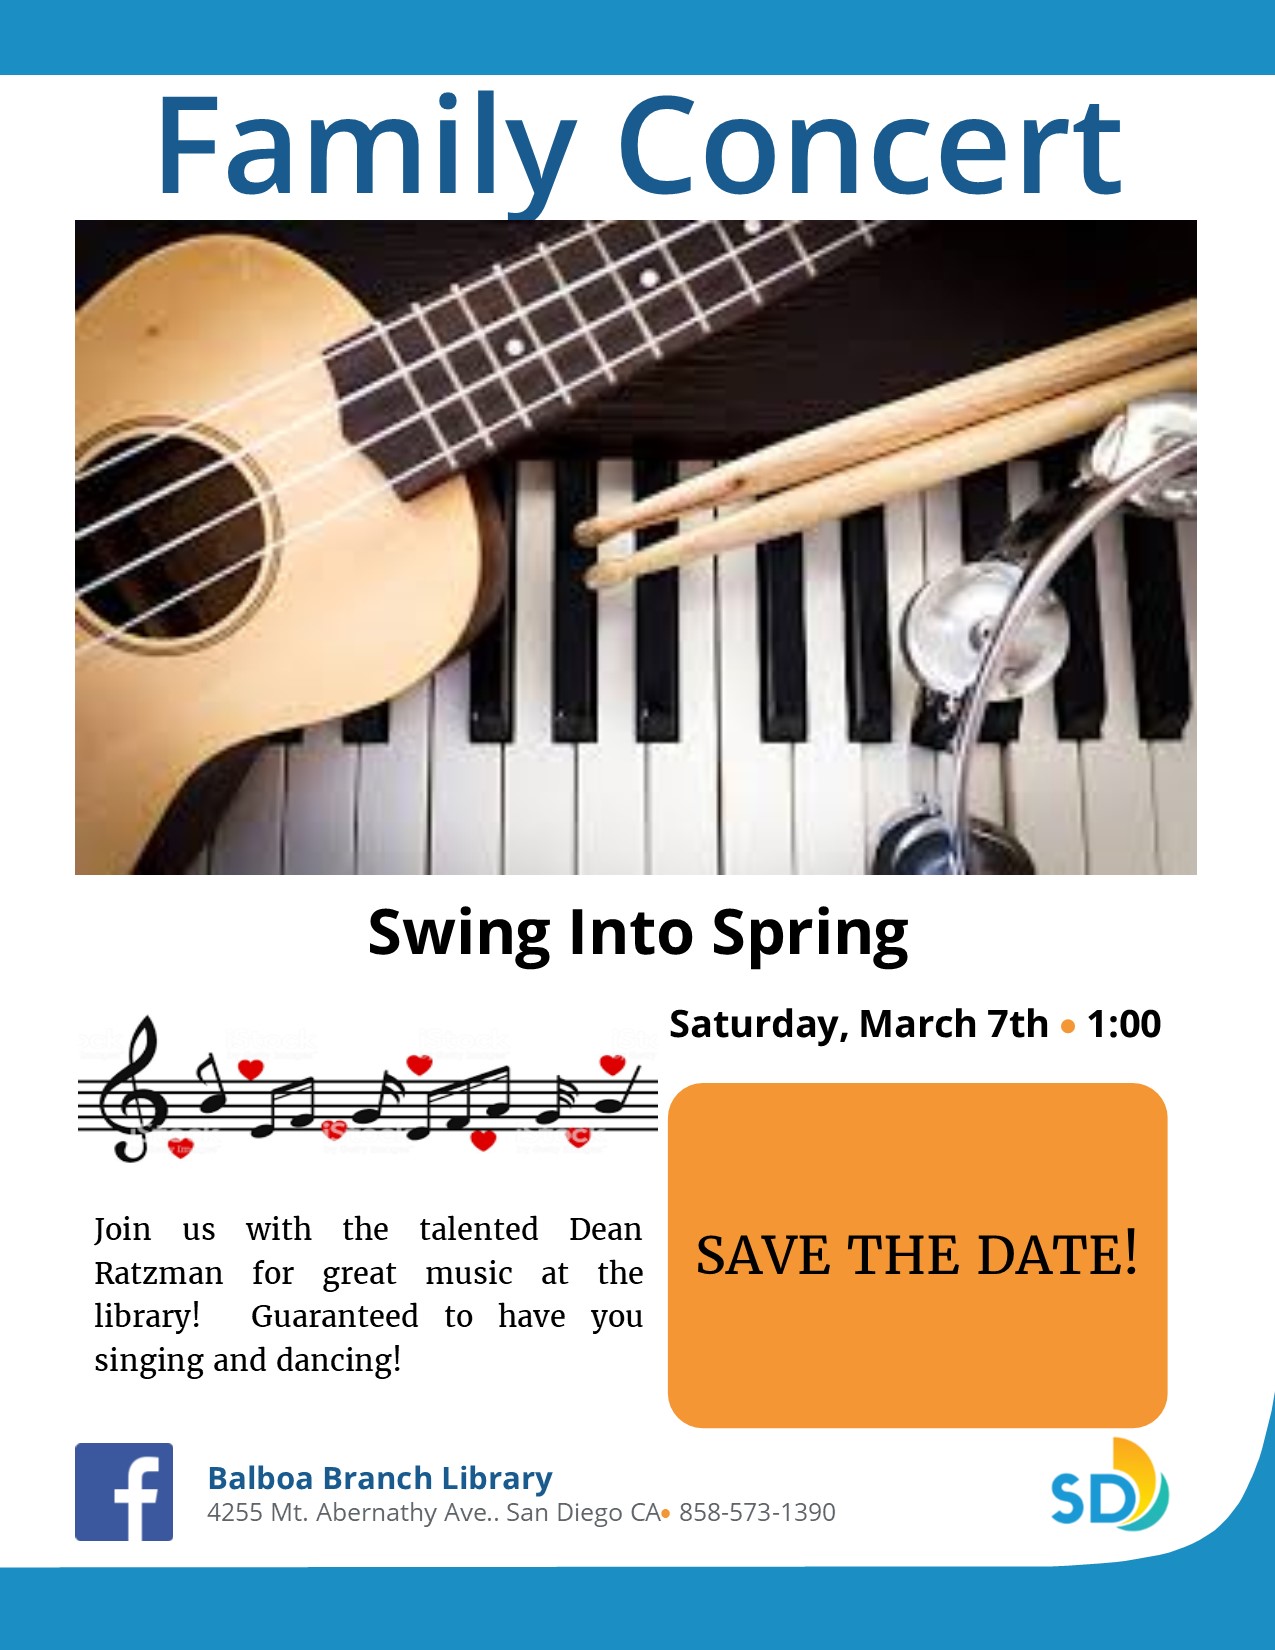 event flyer with images of various musical instruments